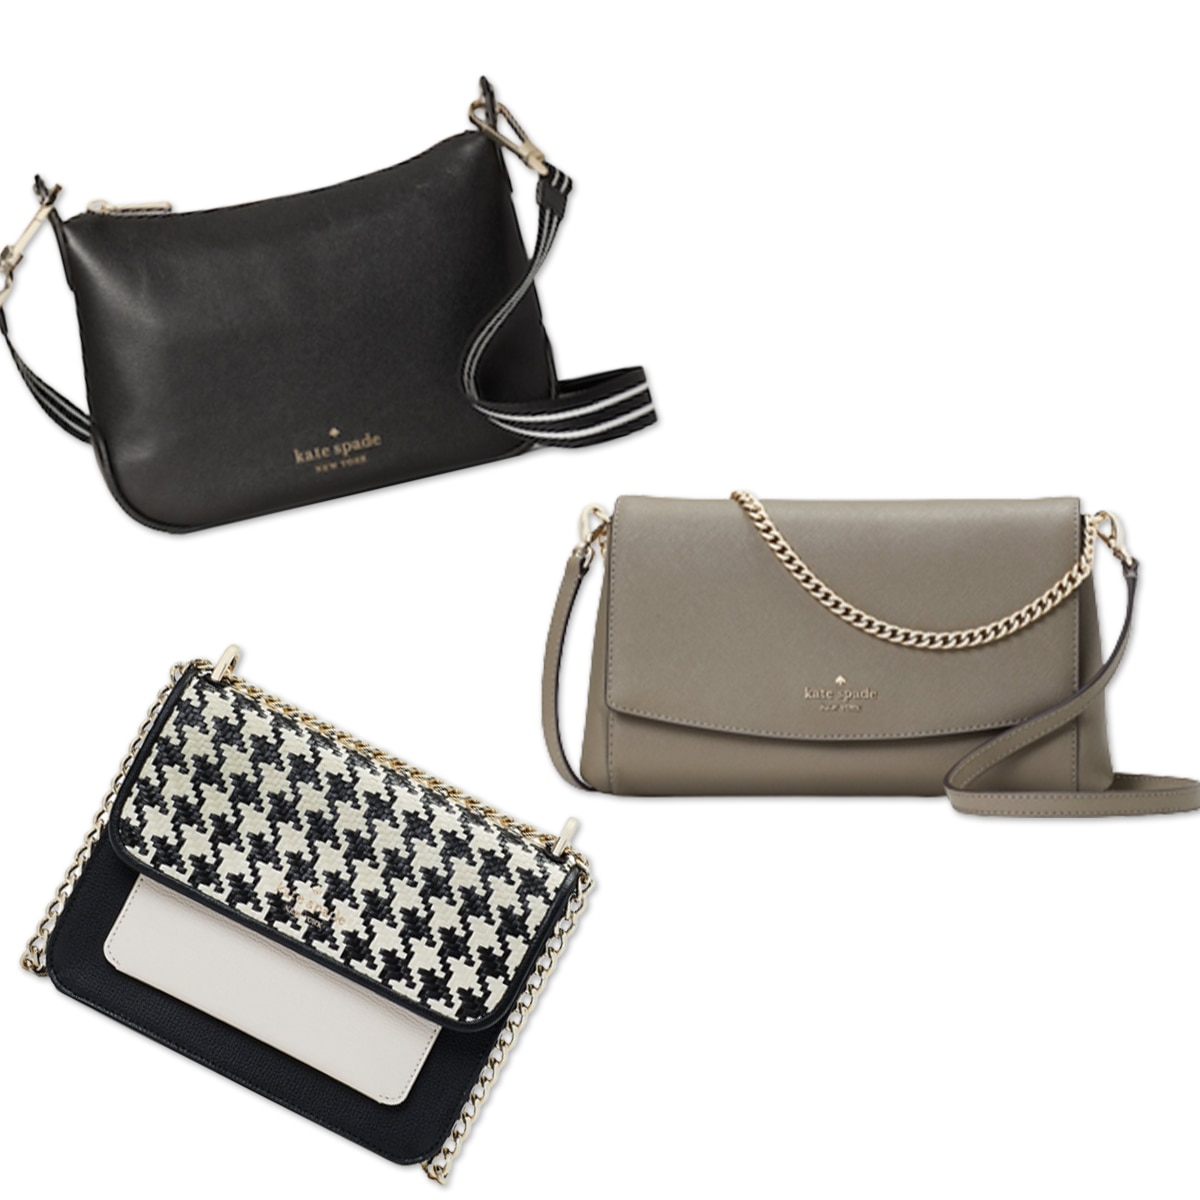 Kate Spade Bags and Wallets Are on Super Sale Right Now